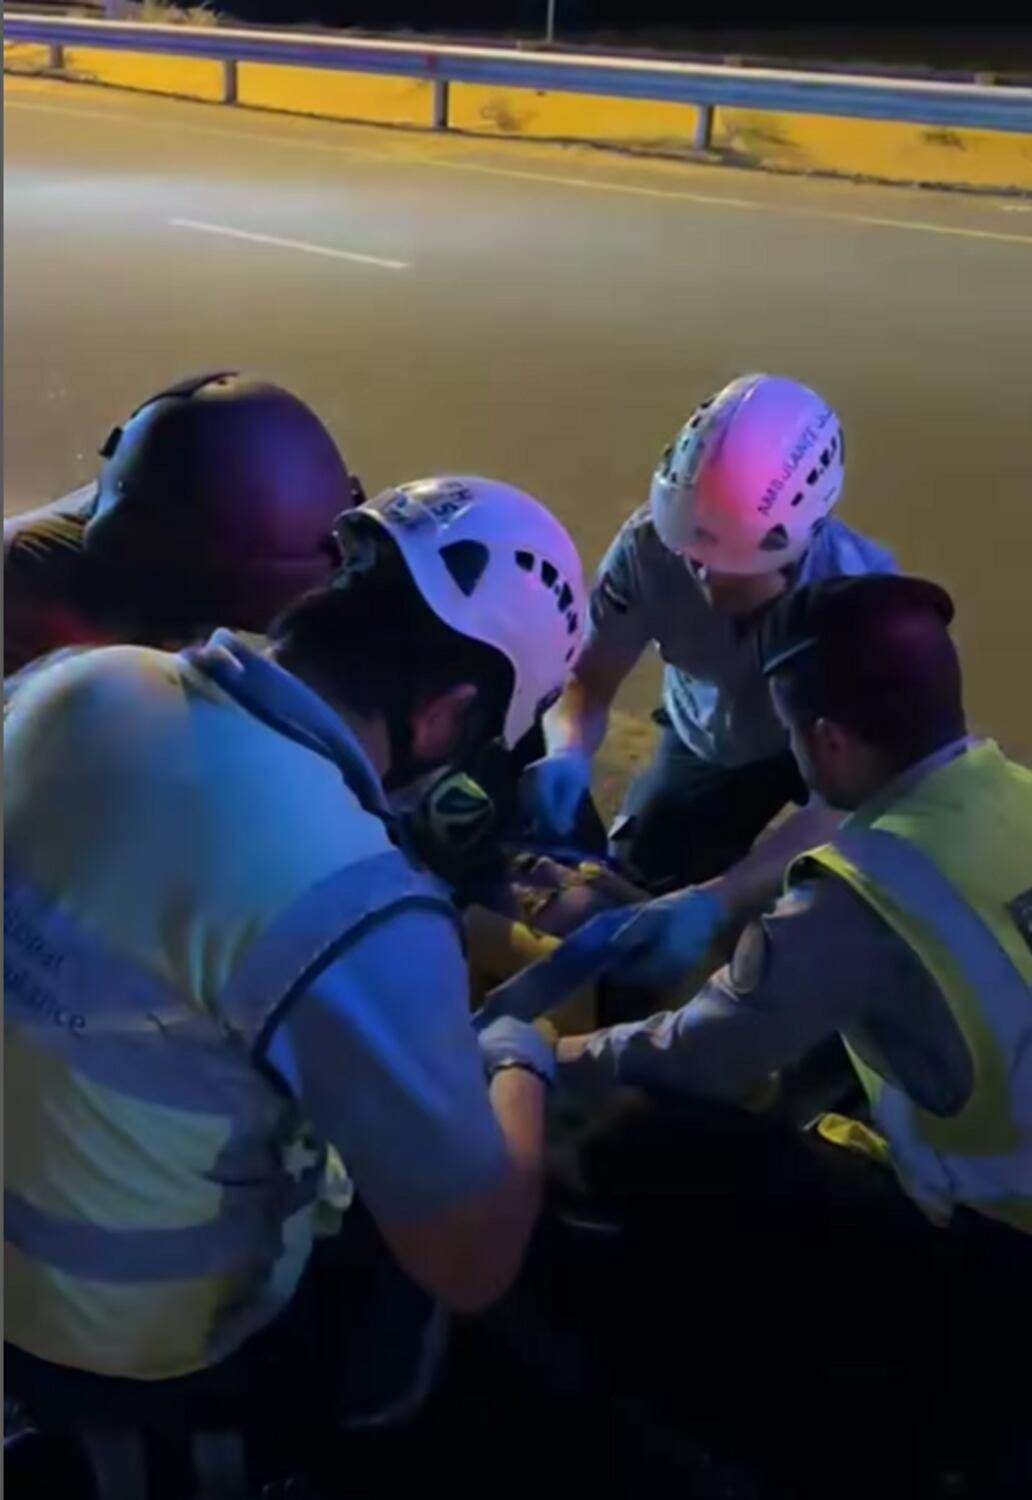 The National Guard's National Search and Rescue Centre, in collaboration with Sharjah Police, carried out a successful medical evacuation operation.